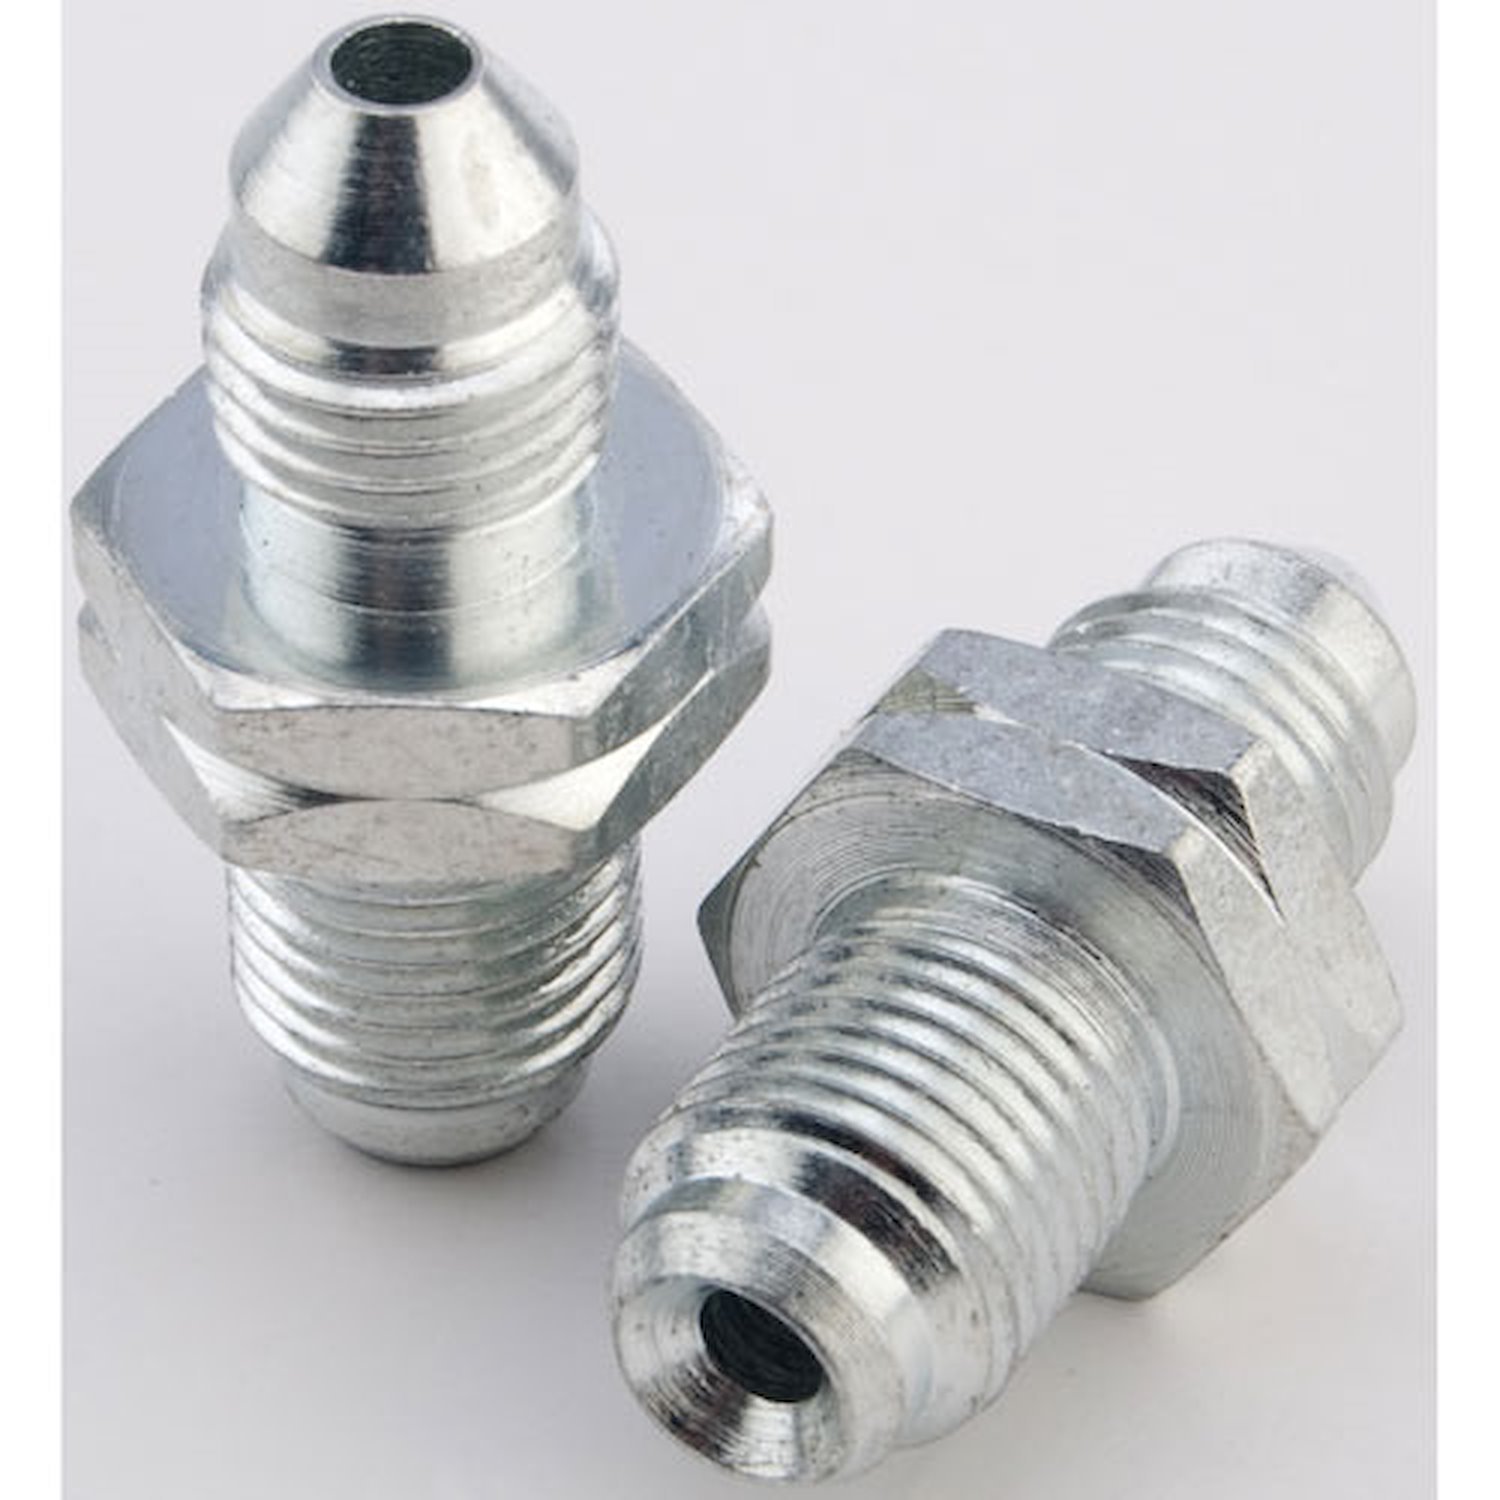 AN to Bubble Flare Male Caliper Fittings [-3 AN x 10mm x 1.0]